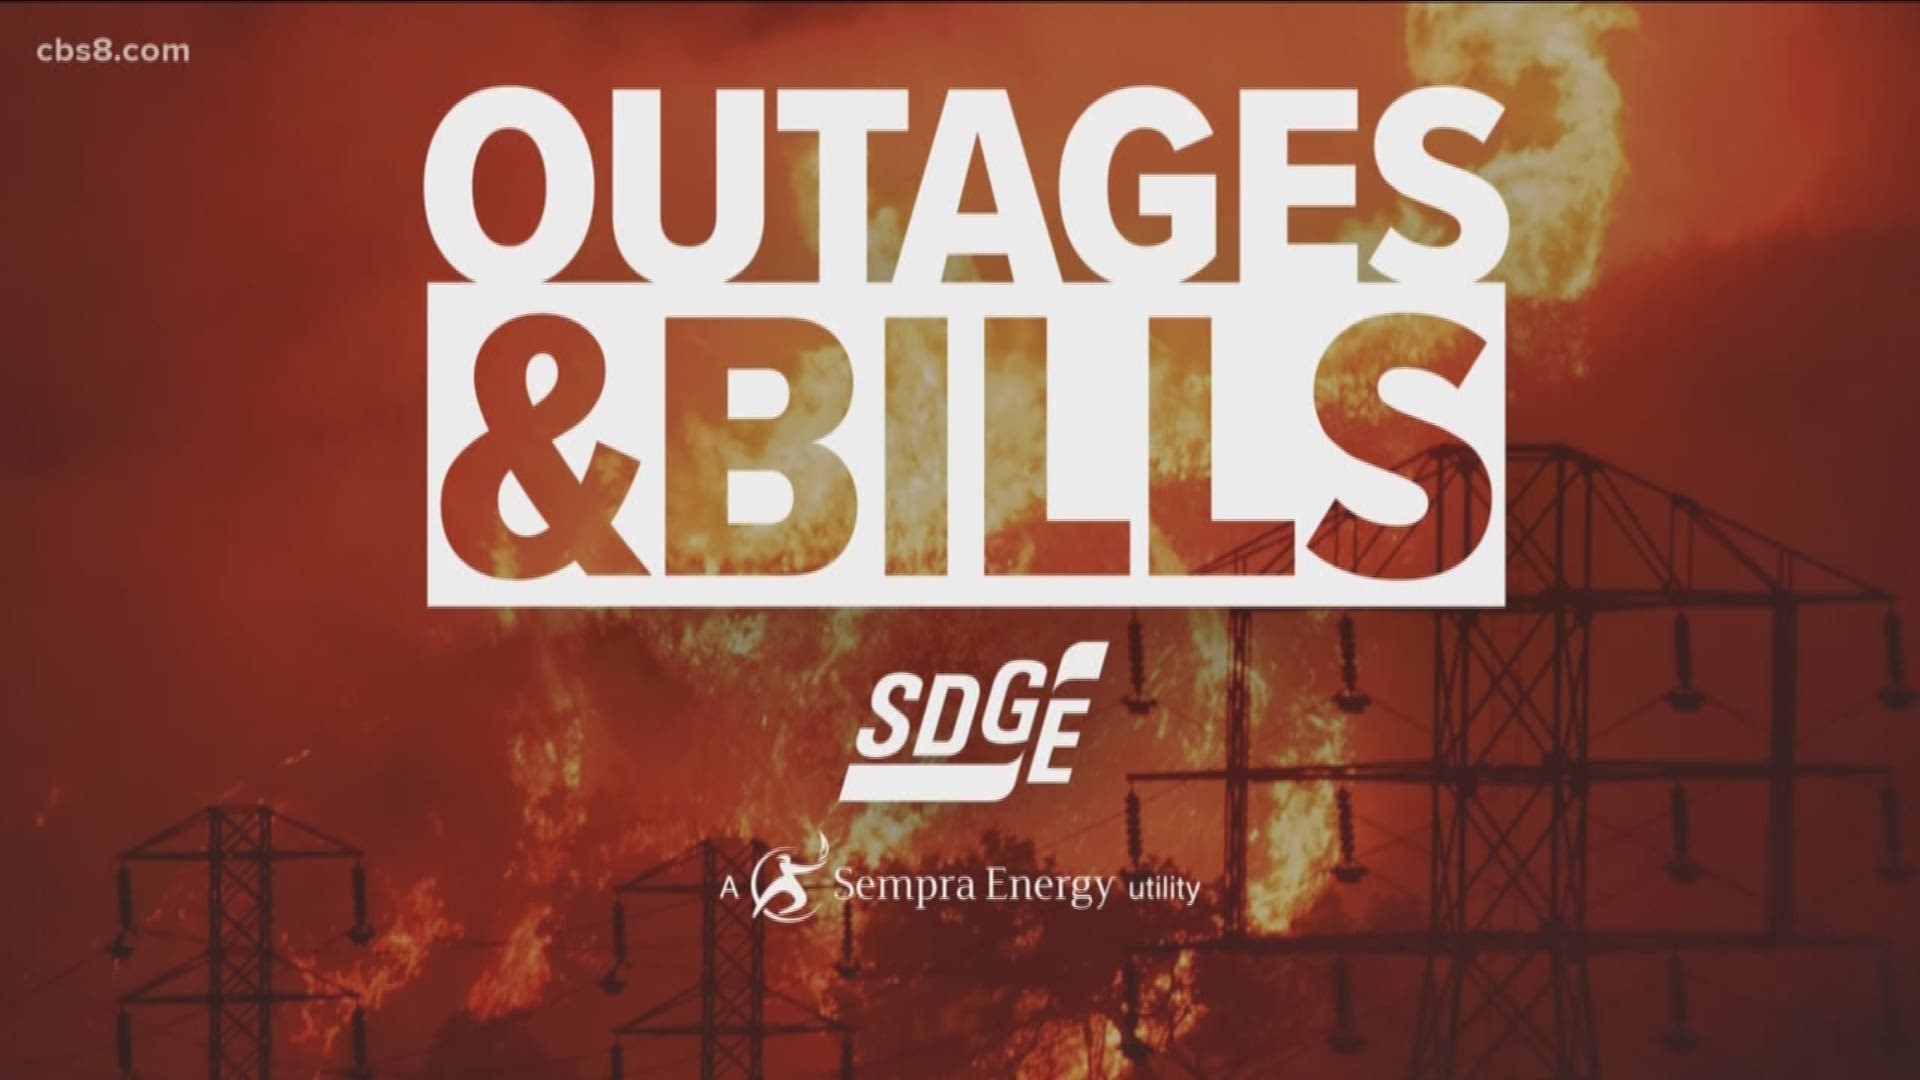 SDG&E is encouraging customers to wait until their bill is generated and contact them with any concerns.